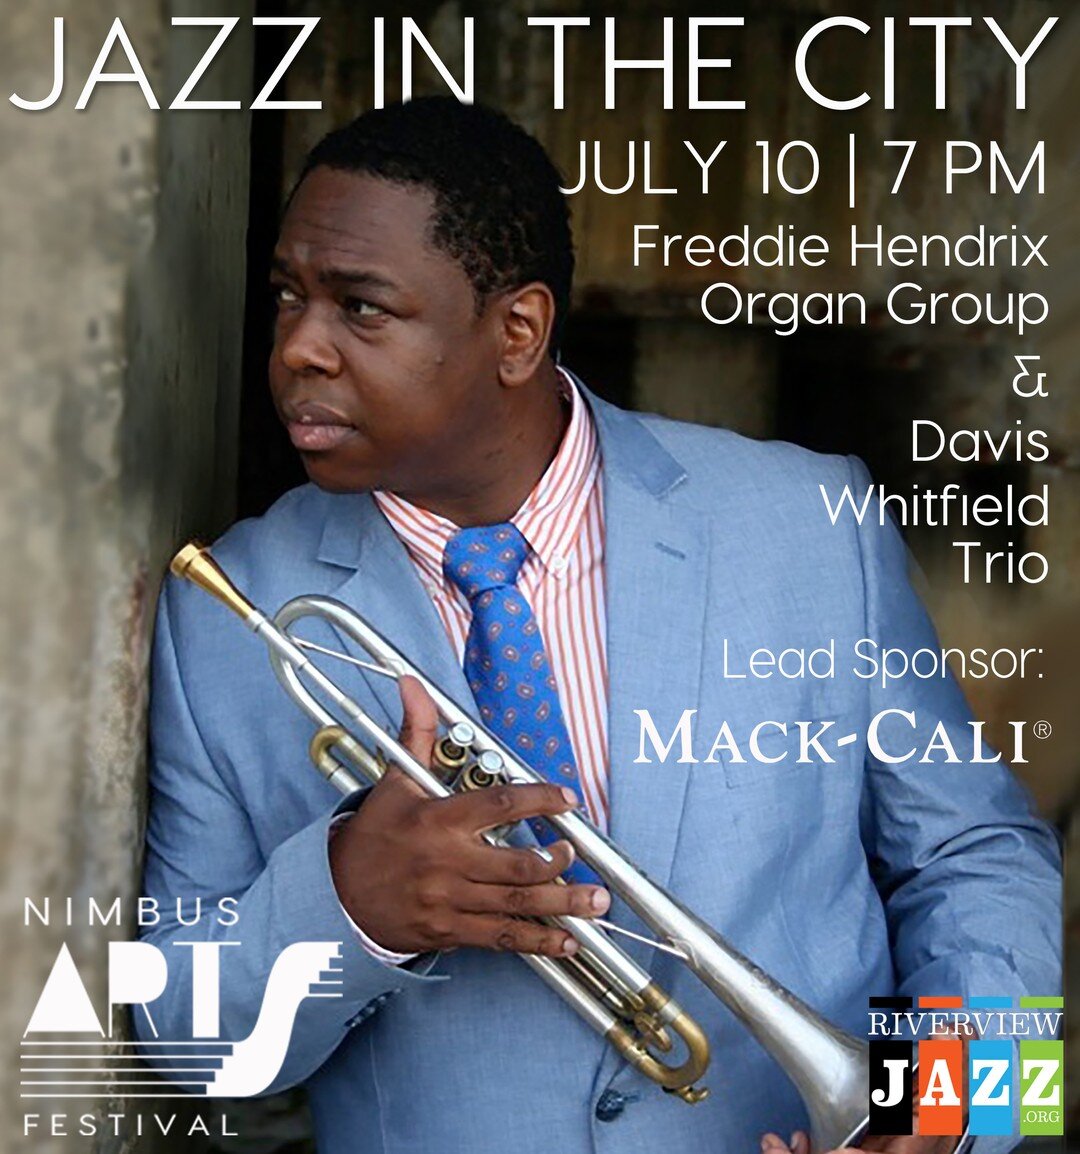 BREAKING NEWS - Limited discount for our followers!

5 VIP tables for our Jazz in the City event on July 10th are now at $50 (discounted from $80) with code: JCJF. 
VIP Table includes: premium seating for 2, 2 drink tickets, &amp; complimentary pre-s